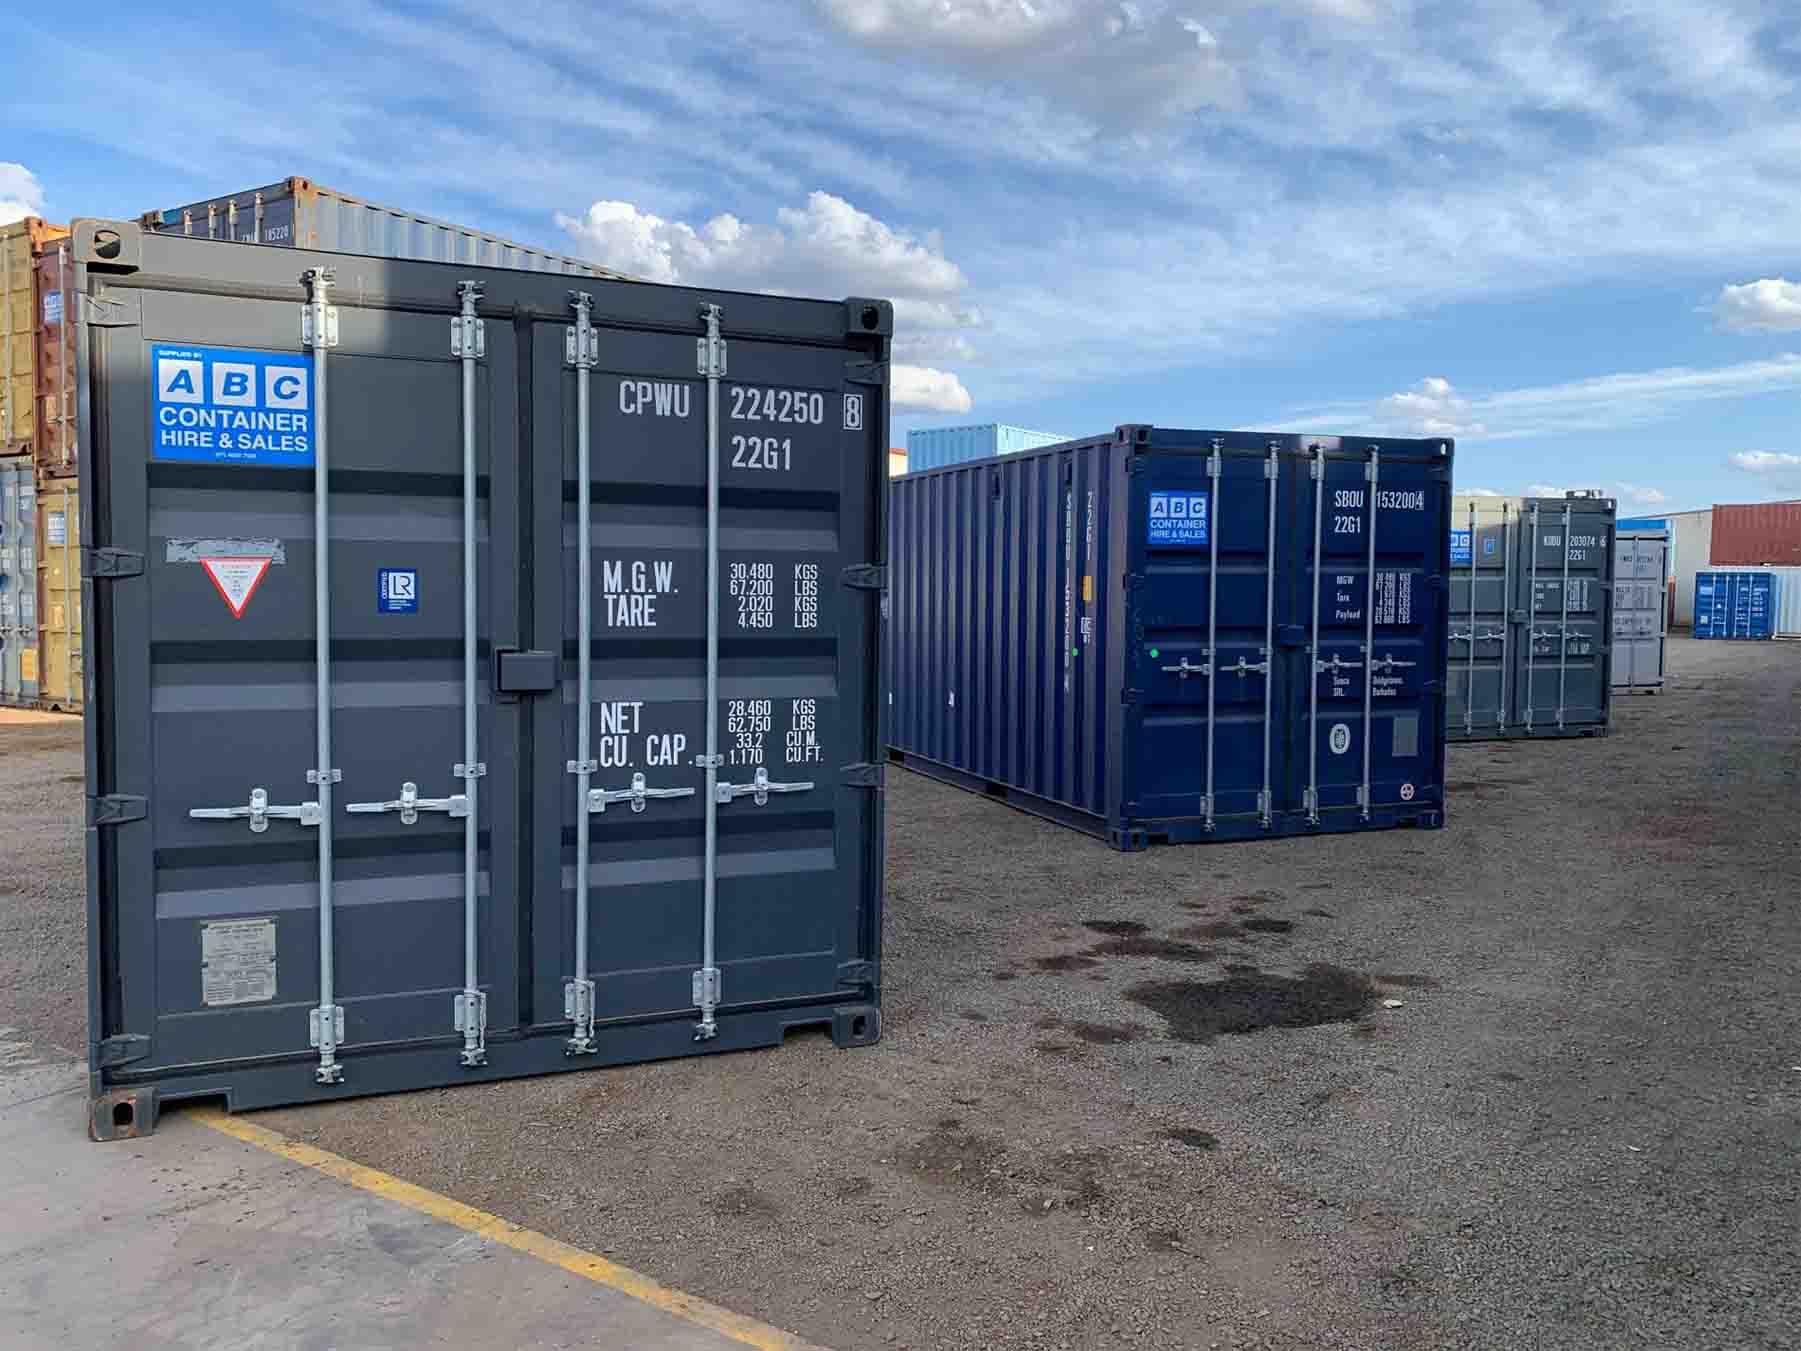 A wide selection of shipping containers.